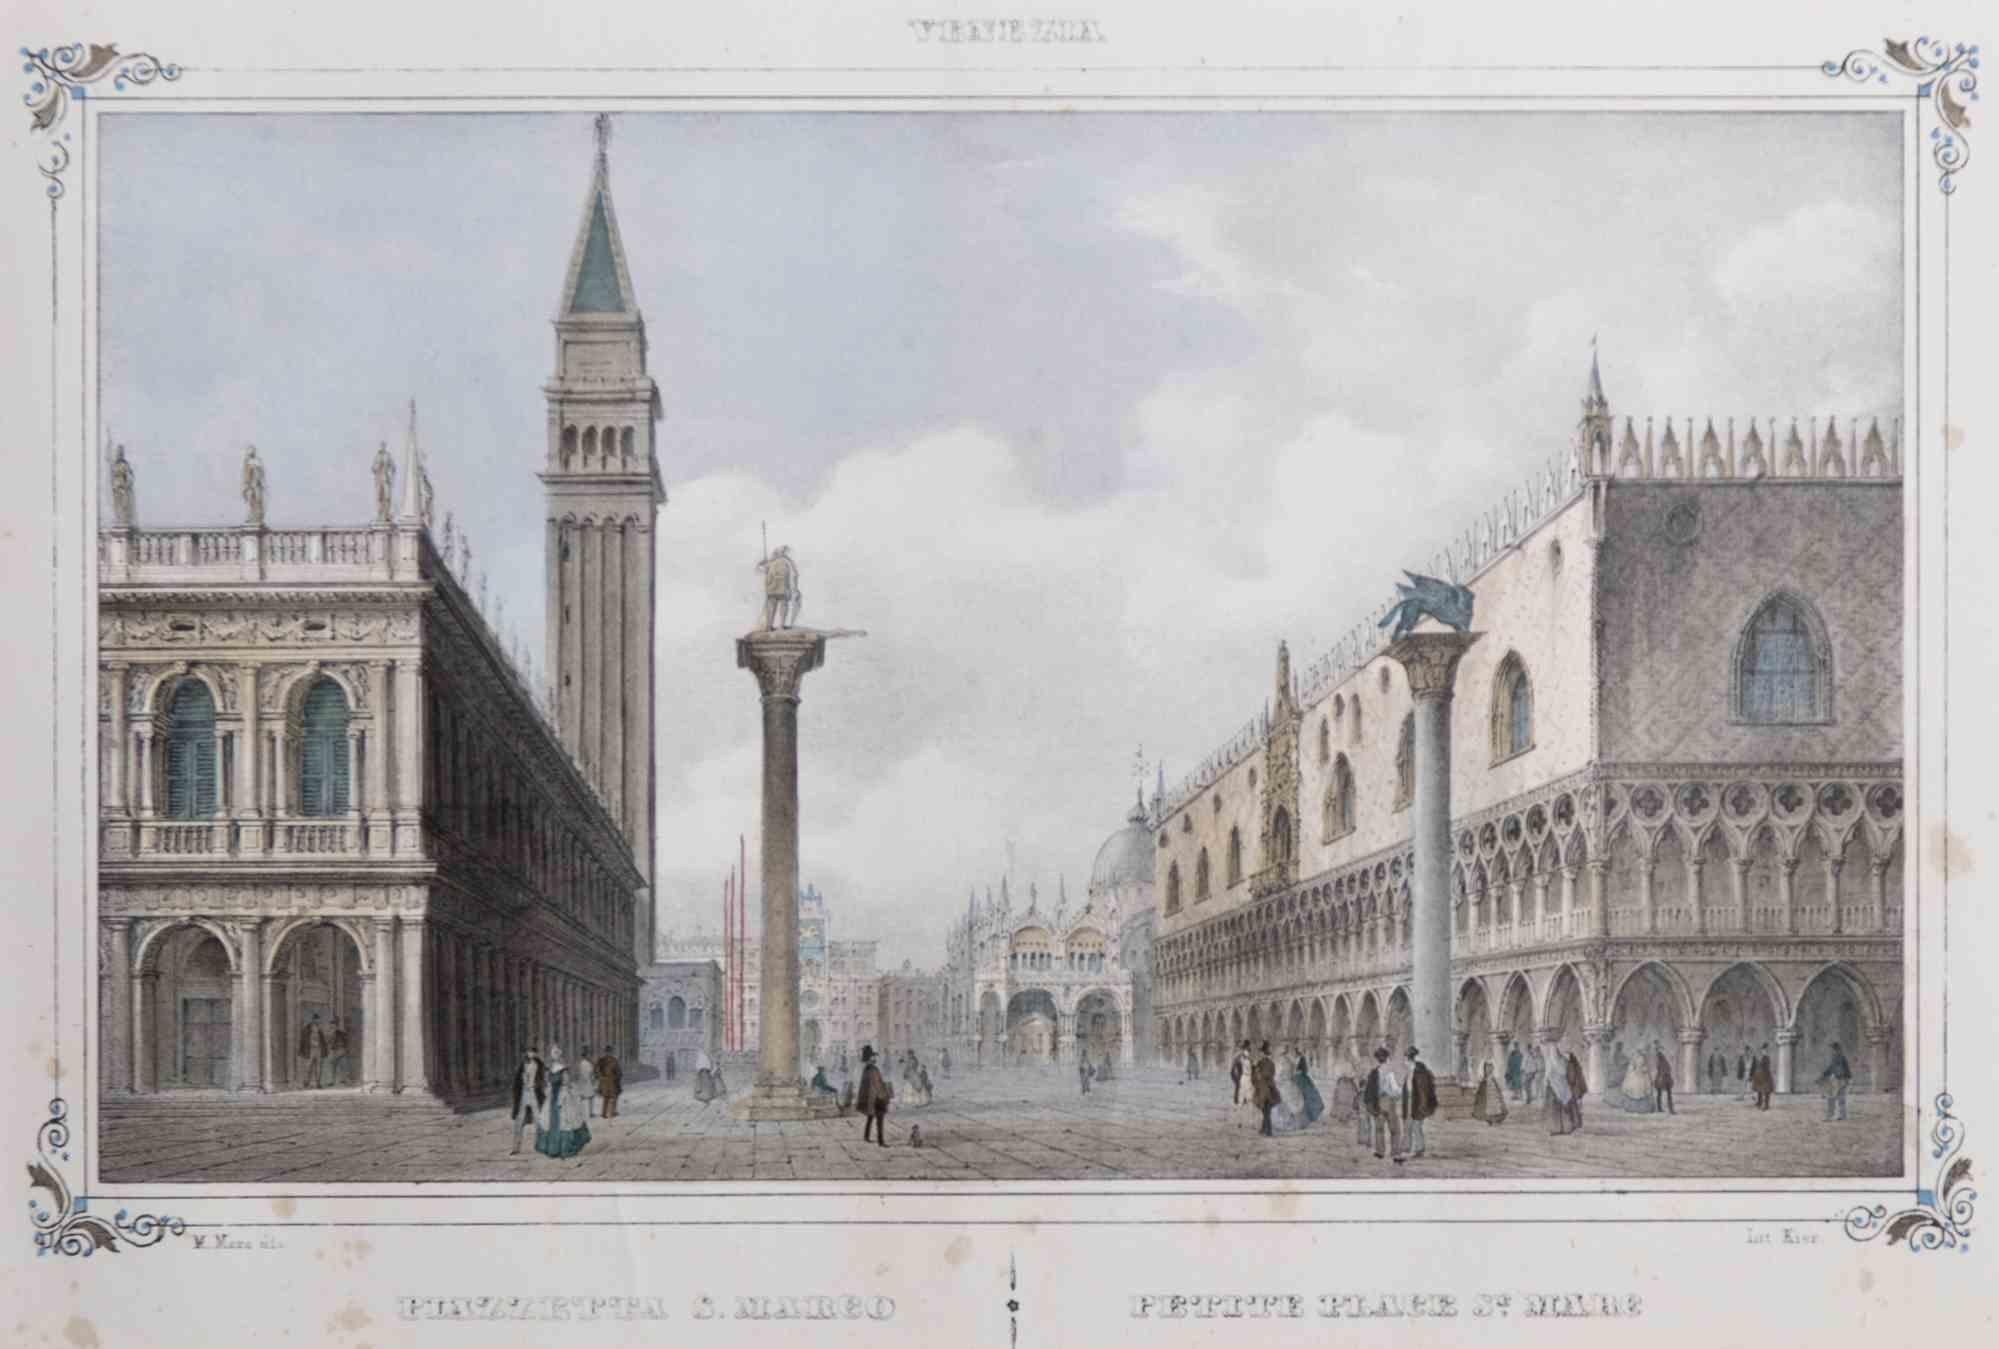 Venice, St. Mark's square is an original artwork realized in the mid 19th century by Giuseppe Kier.

Mixed colored lithograph.

Framed.

Good conditions except for some stains.

A beautiful old view of this beautiful italian city.